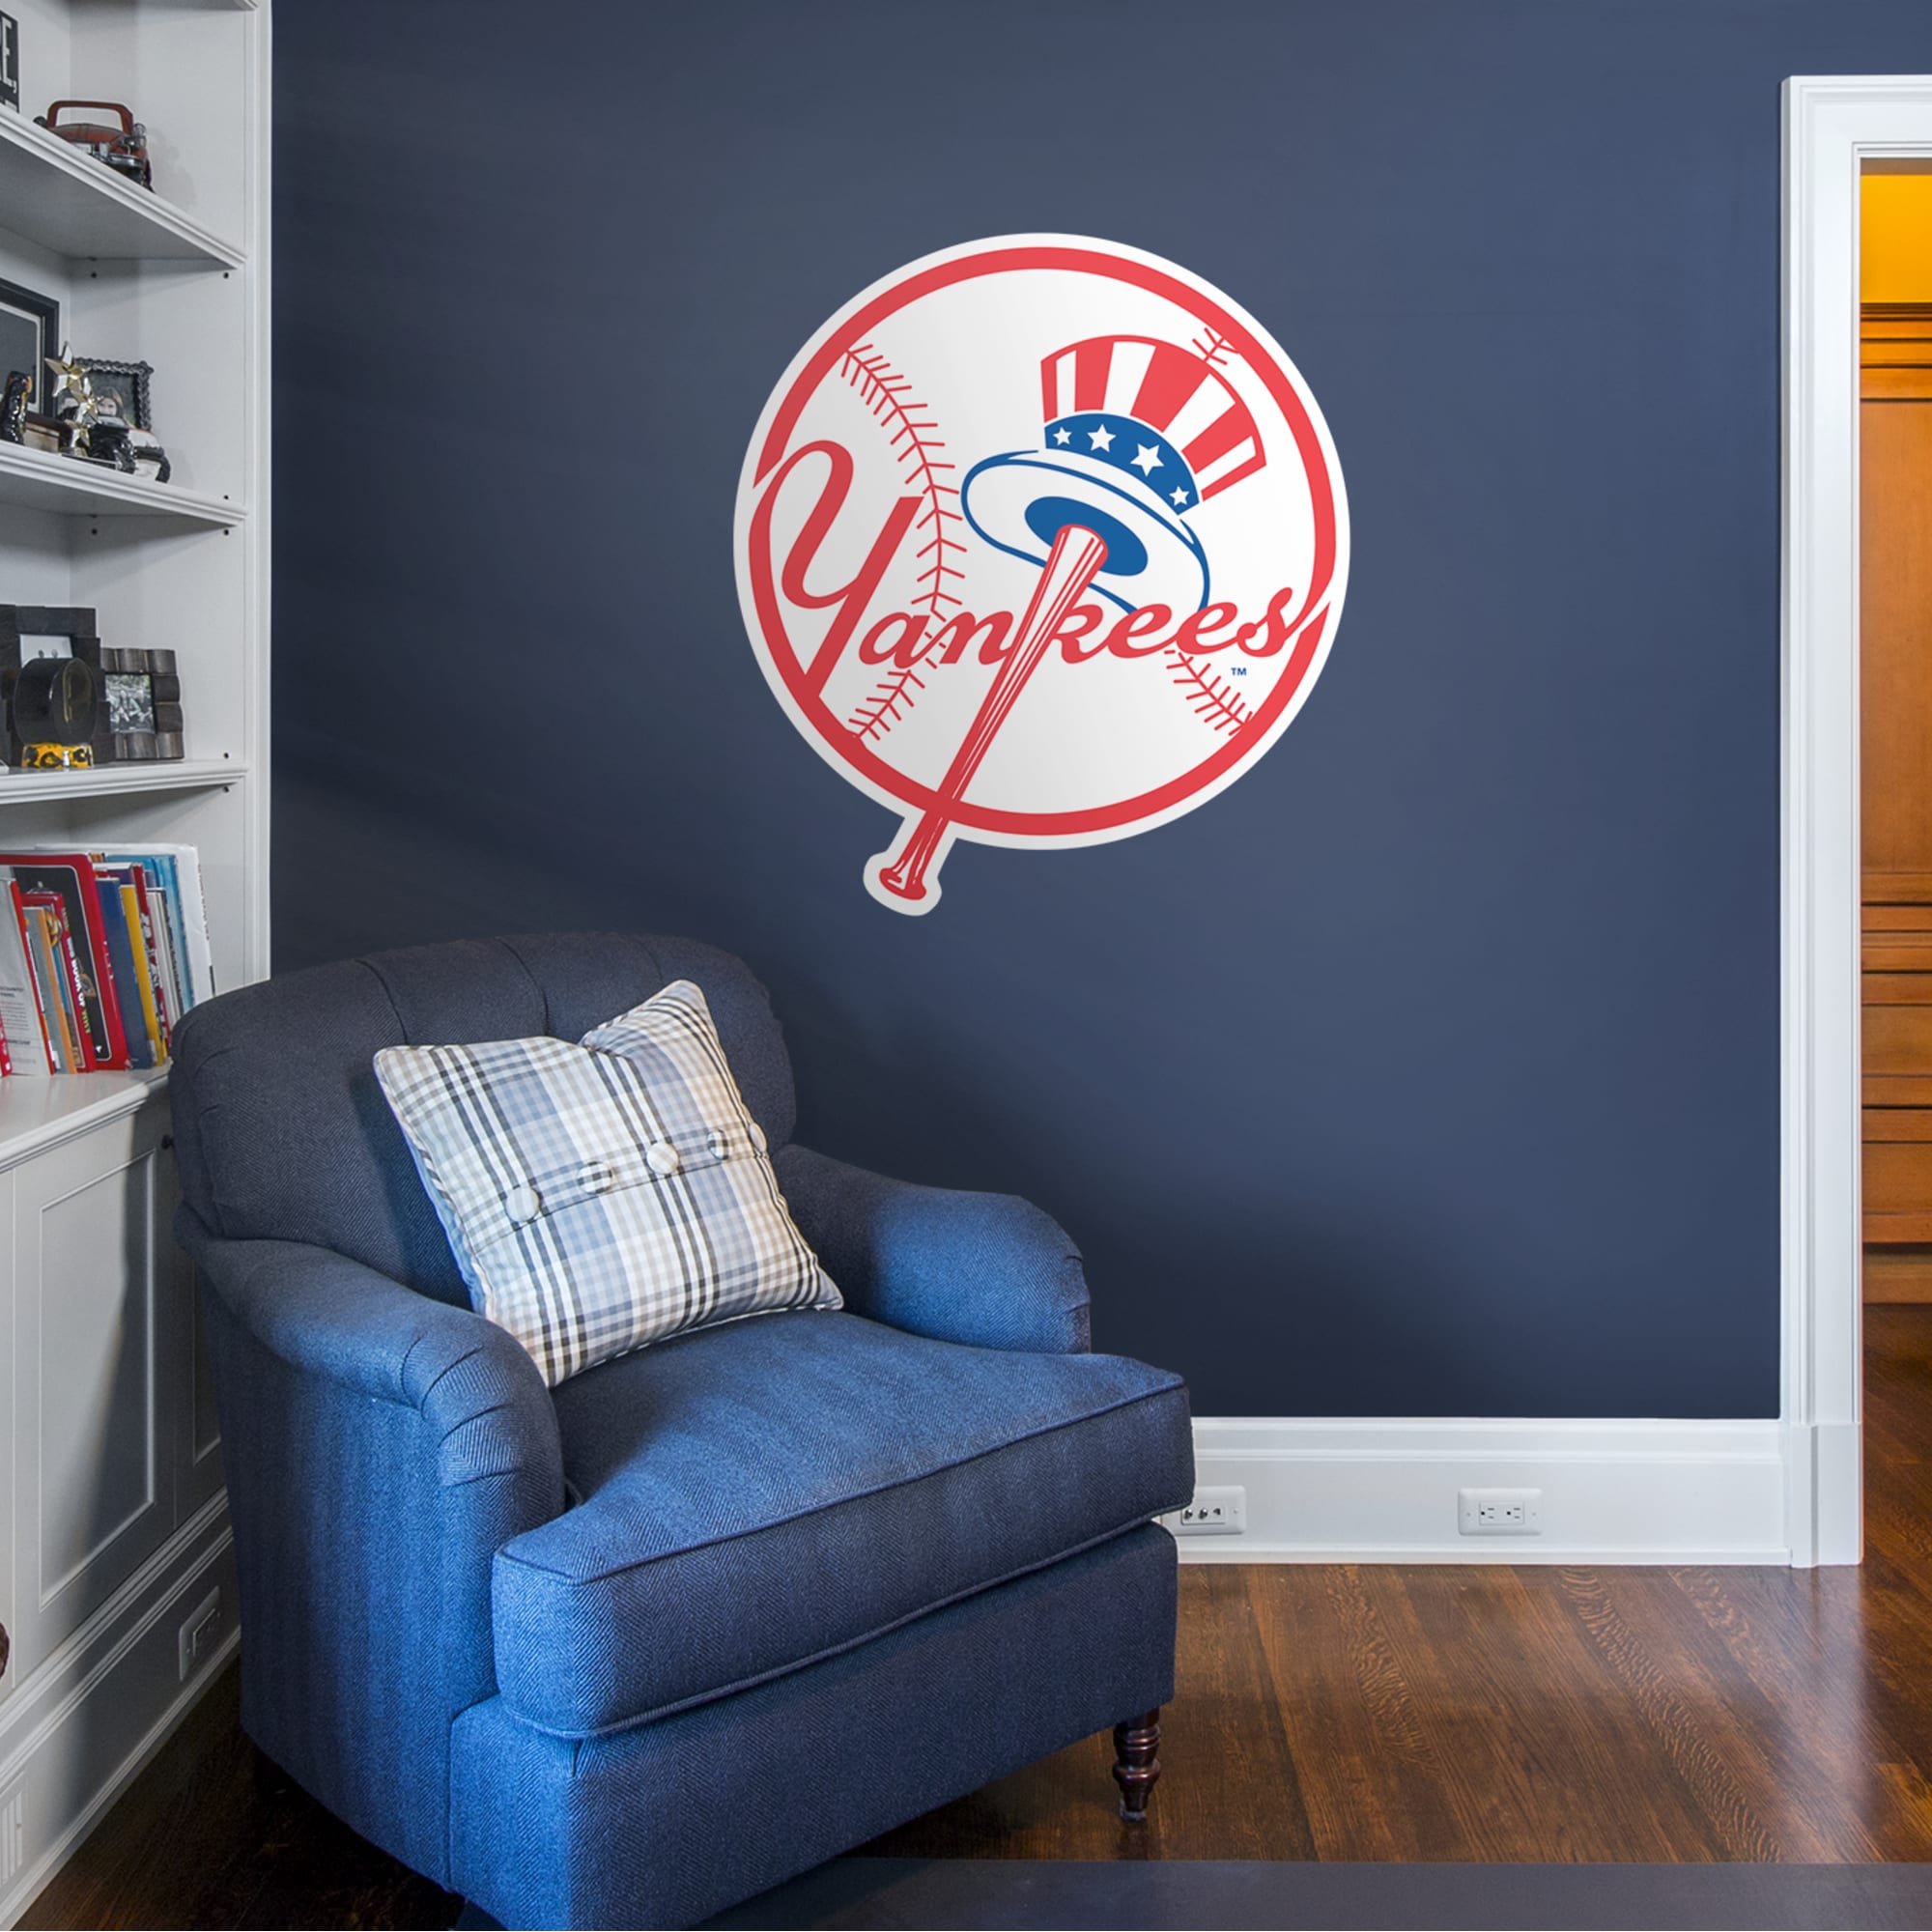 New York Yankees: Circle Logo - Officially Licensed MLB Removable Wall Decal 36.0"W x 40.0"H by Fathead | Vinyl